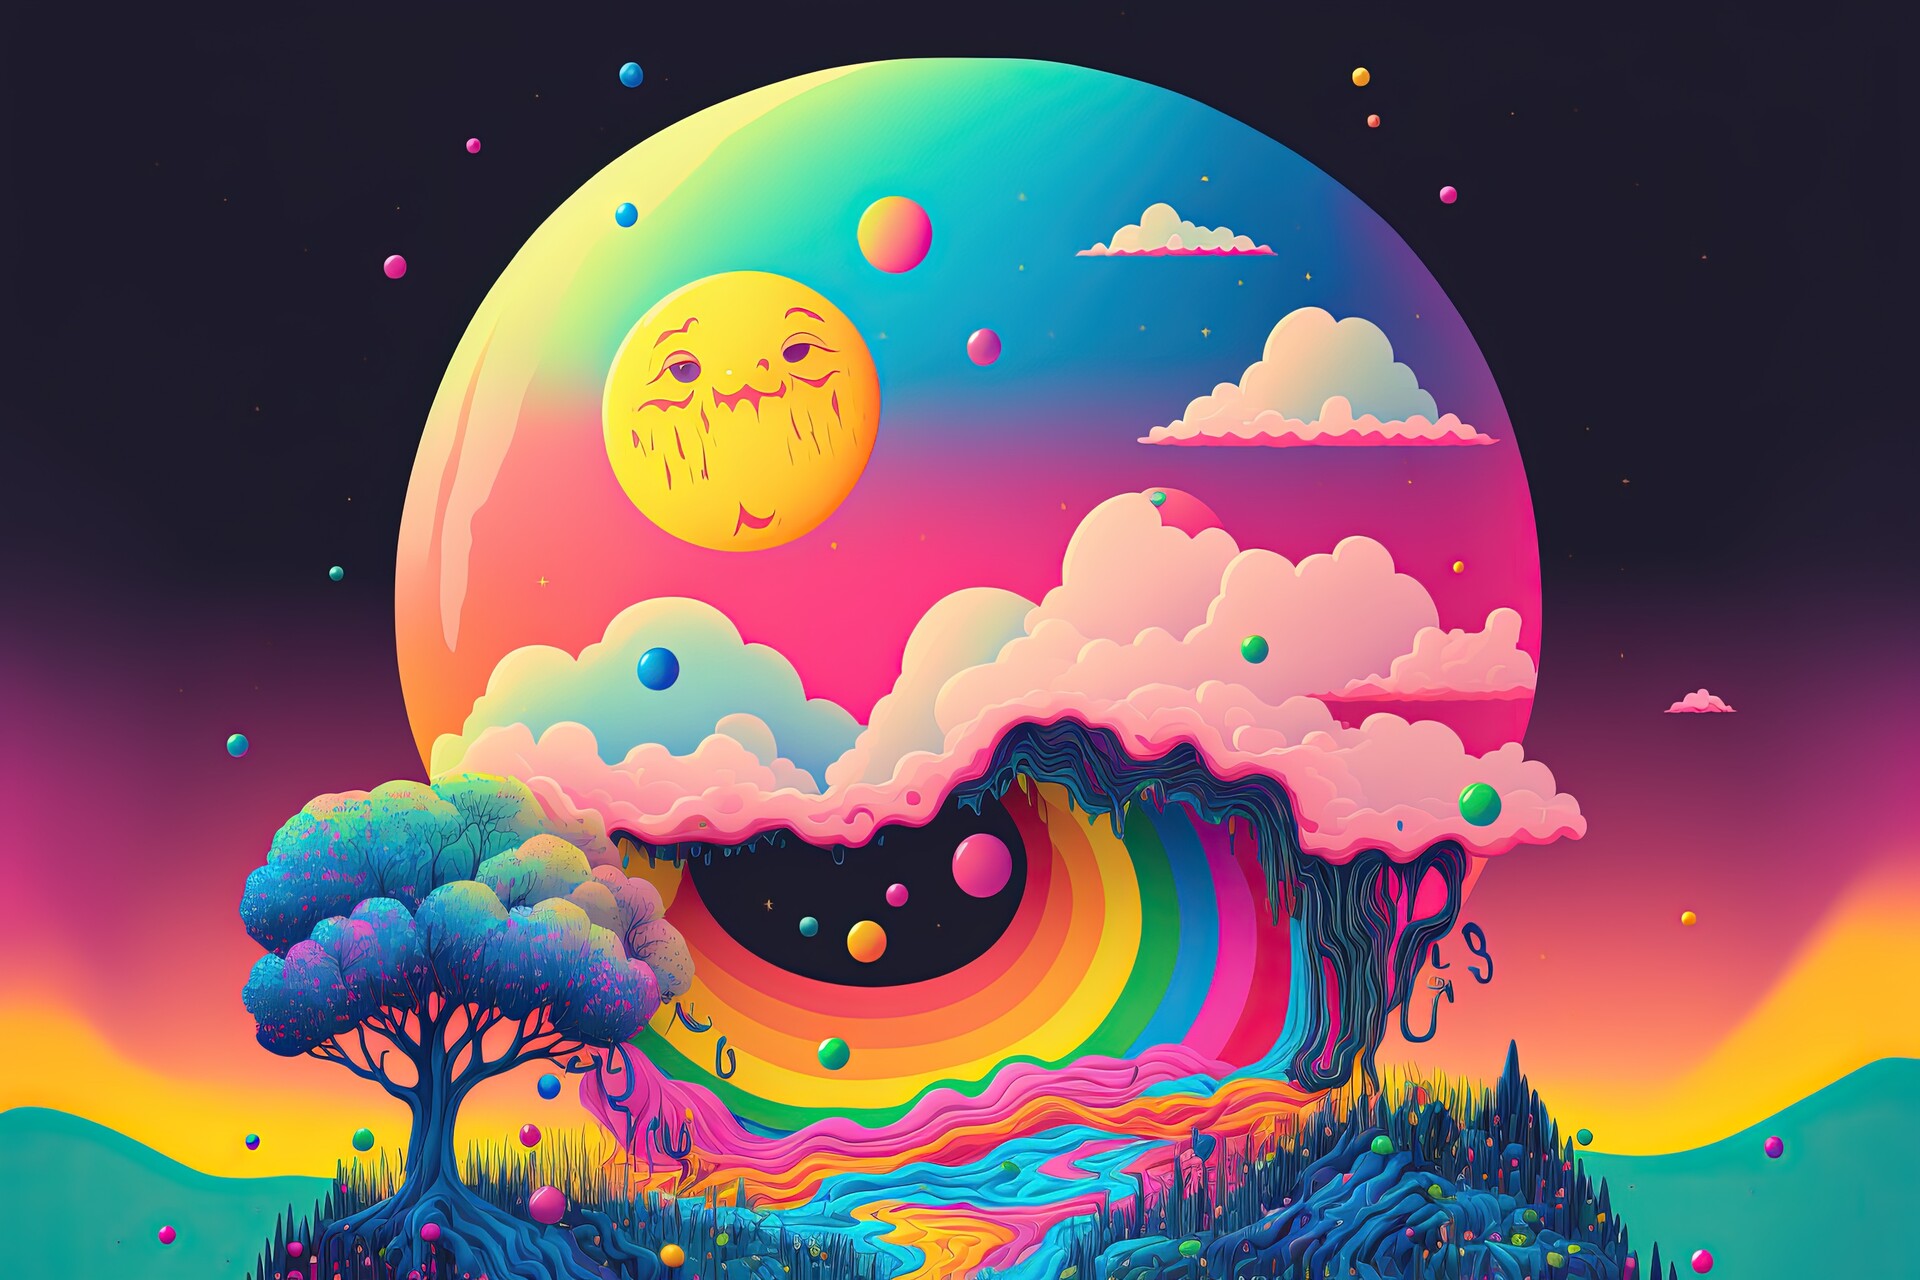 ArtStation - 8k+ Digital Print Download of Psychedelic Paint Drip Rainbow  Rain Clouds 1.2 - Psychedelia Dripping Paint Rainy Landscape - Artwork /  Illustration / Reference Art